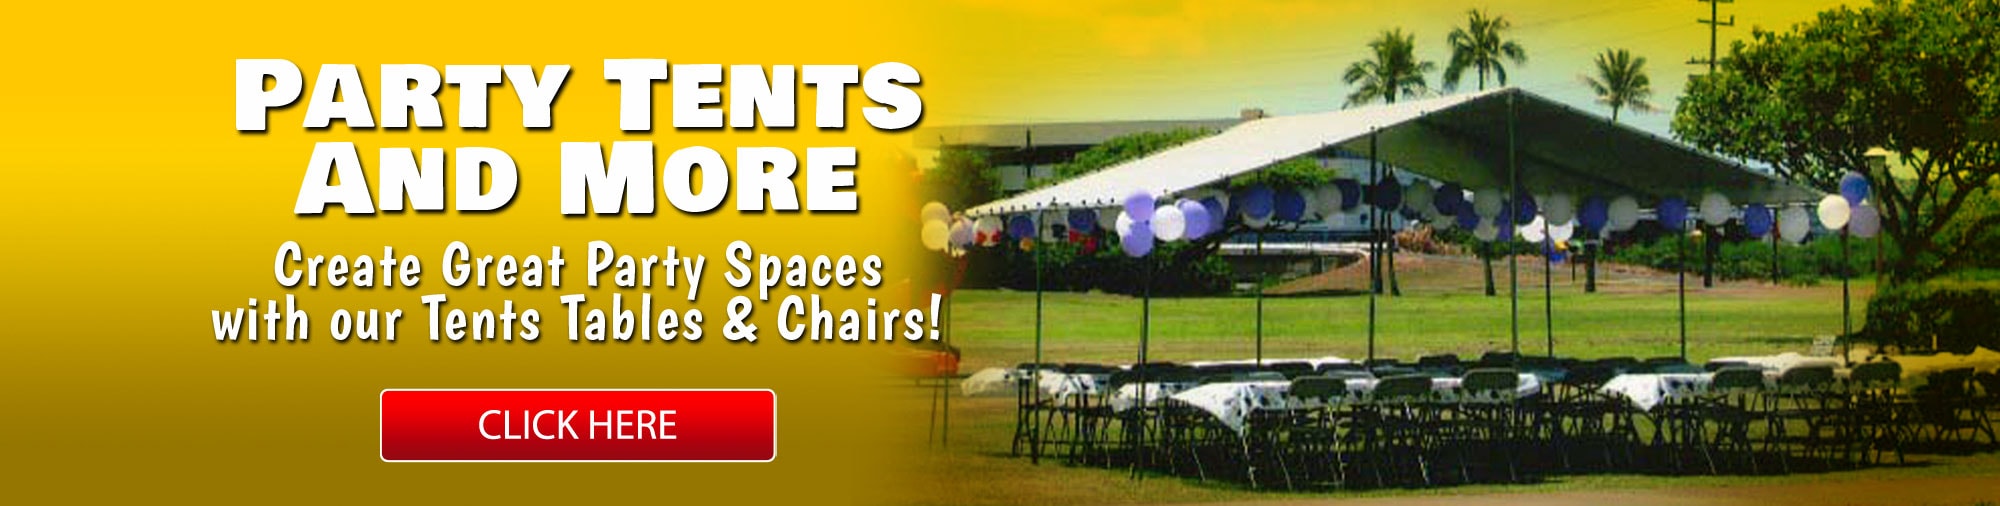 Tent Table & Chair Rentals